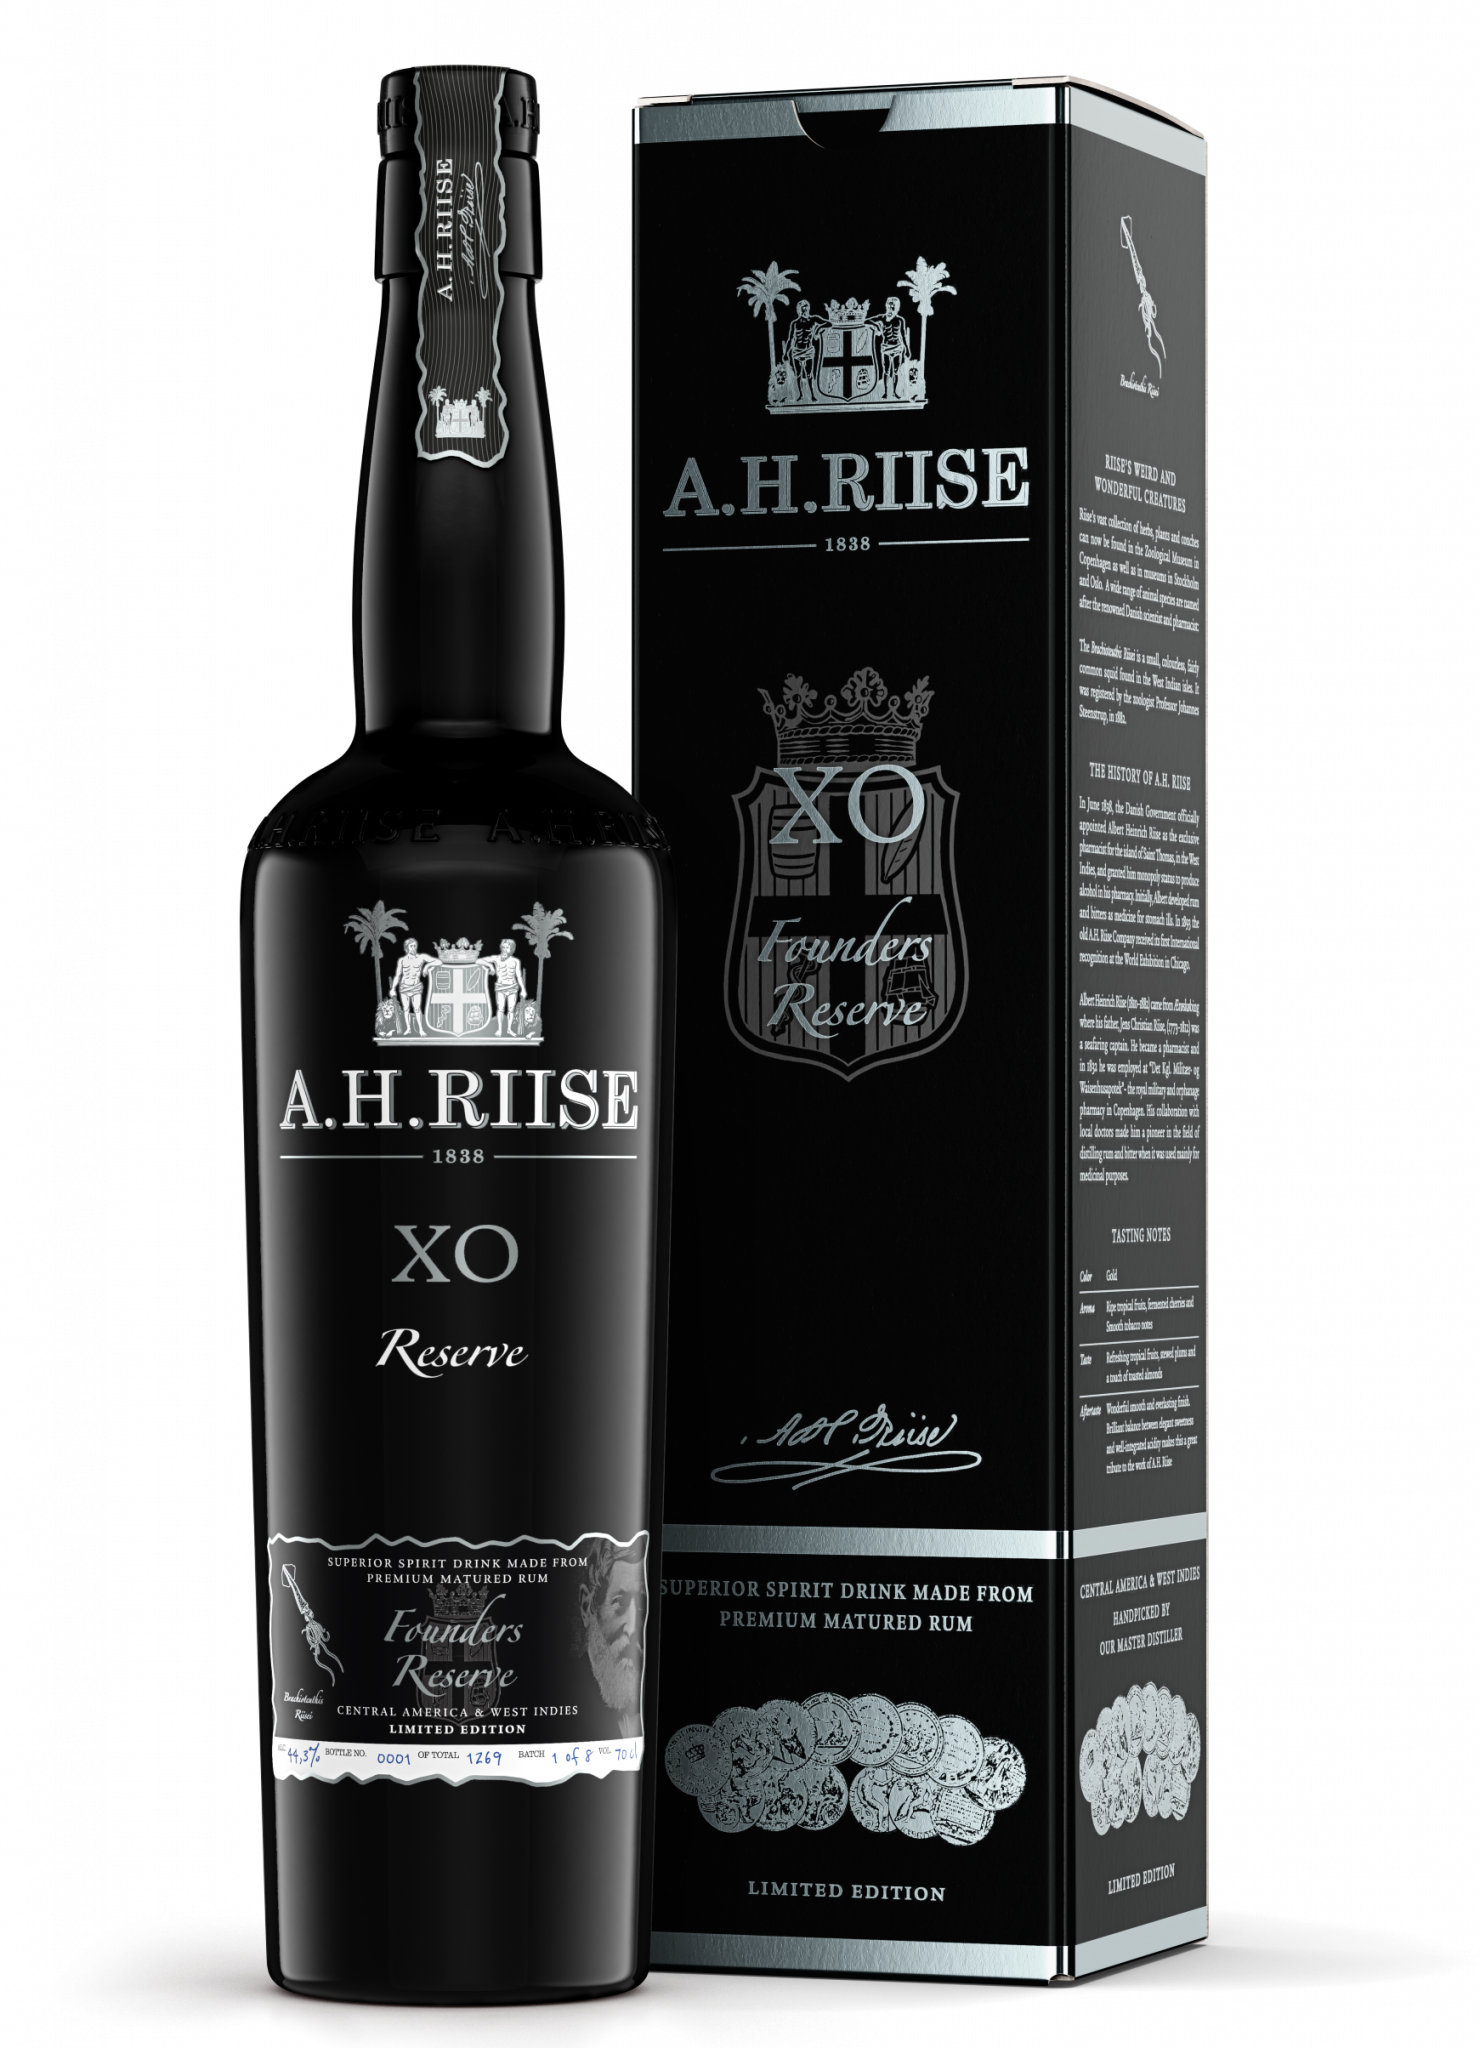 A.H. Riise XO Founders Reserve 2